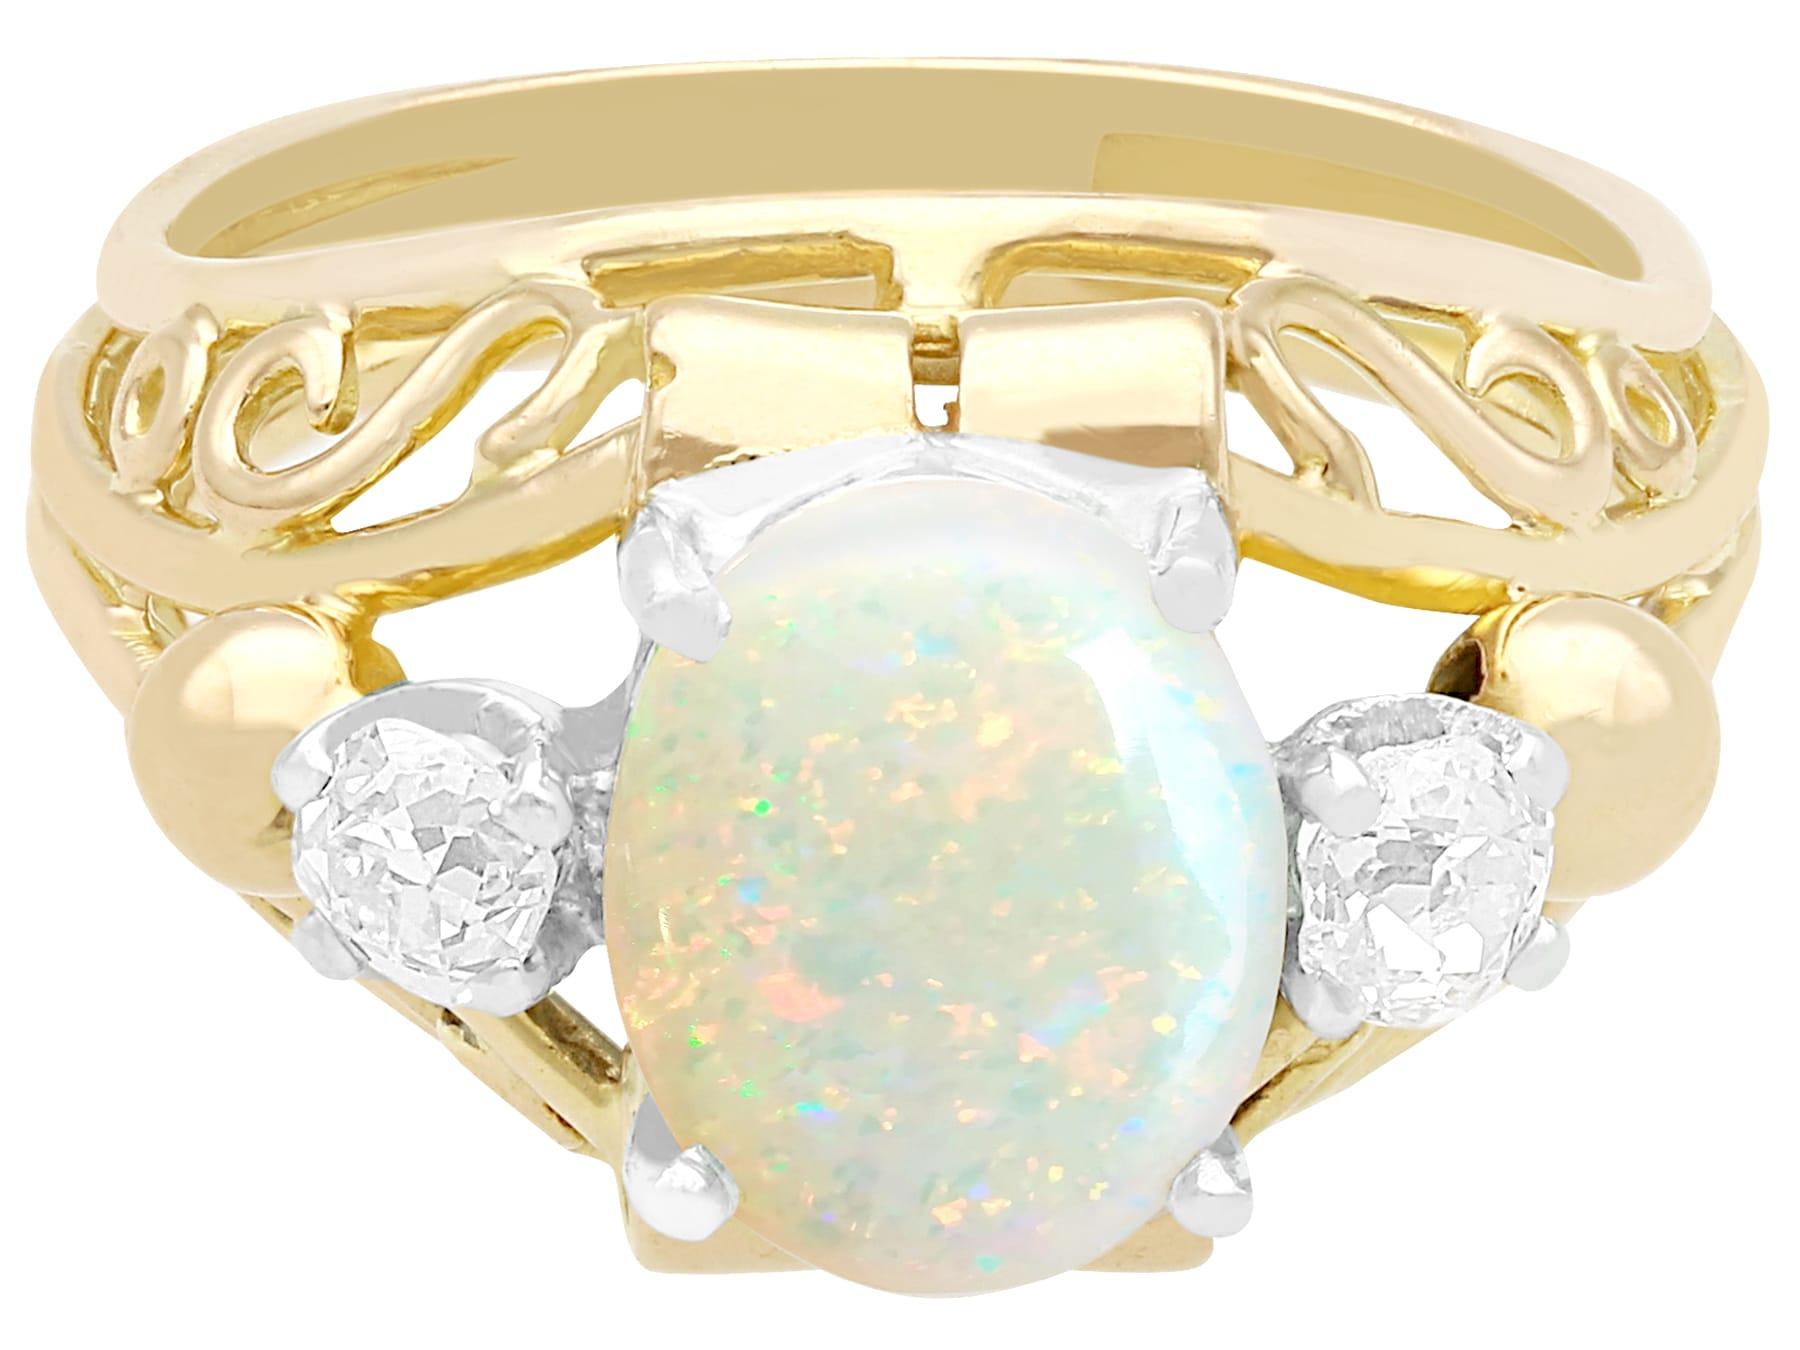 1930s, French, 1.82 Carat Cabochon Cut Opal and Diamond 18K Yellow Gold Ring In Excellent Condition For Sale In Jesmond, Newcastle Upon Tyne